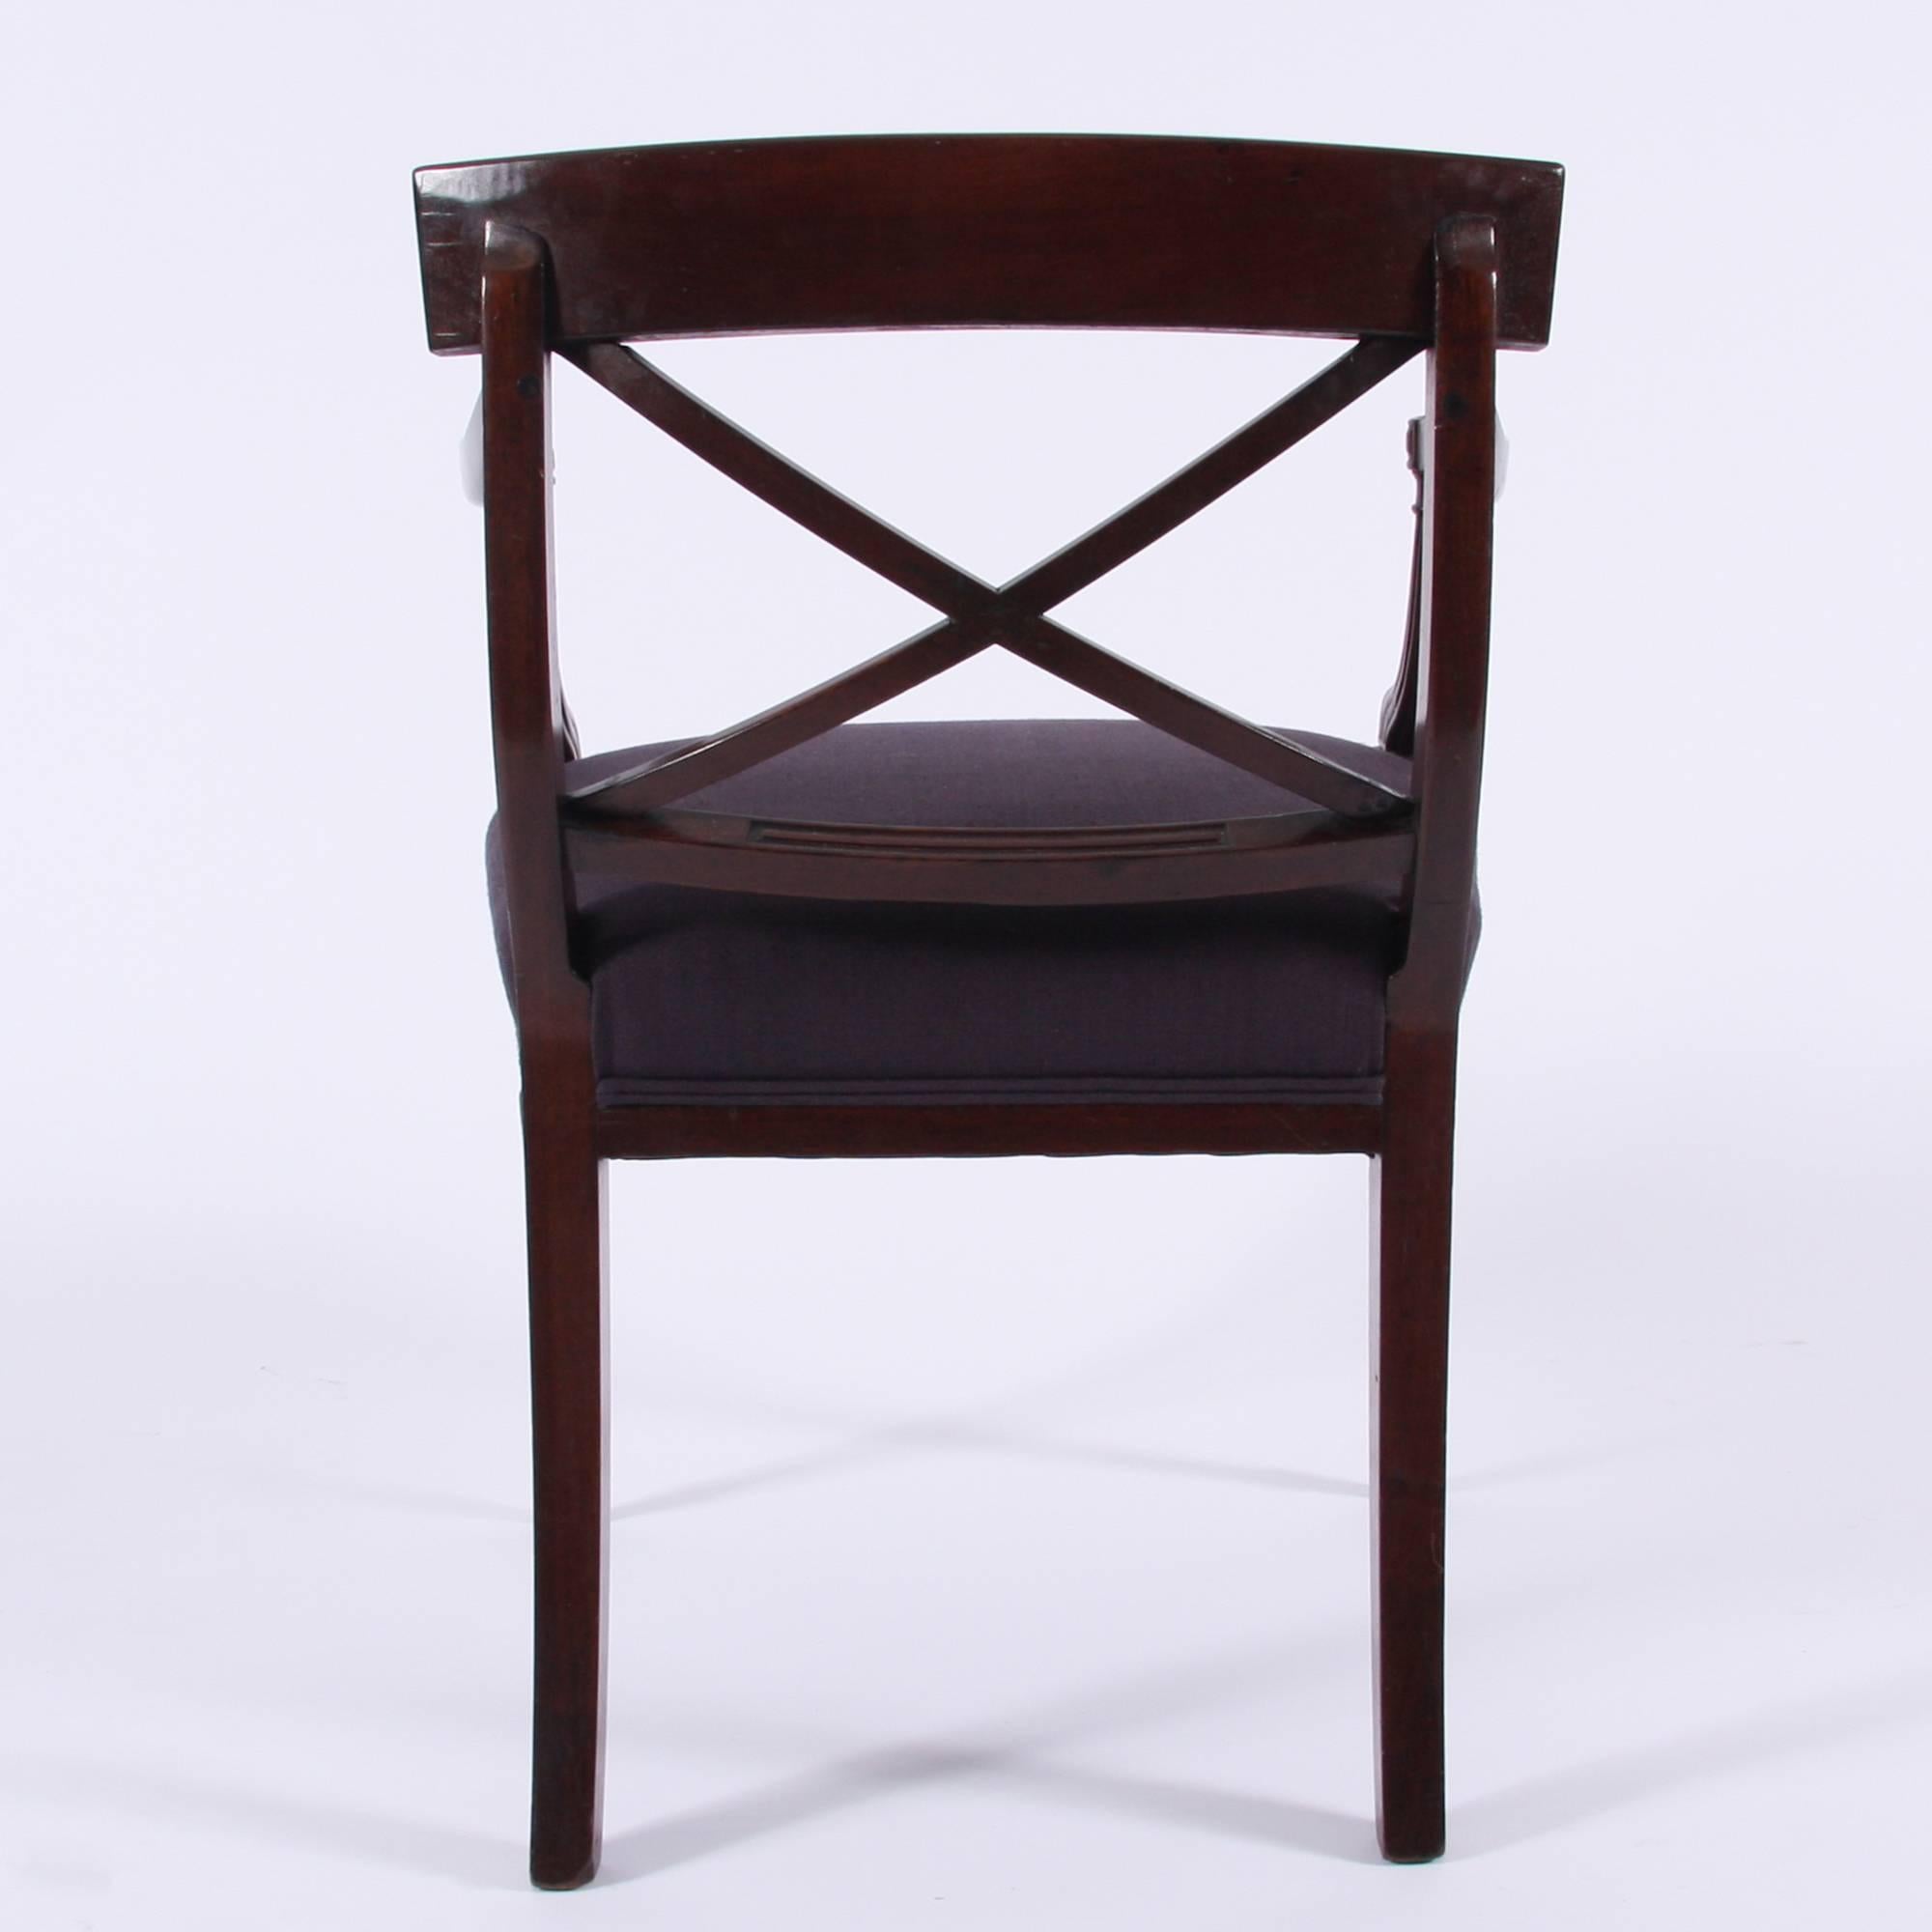 Carved English Regency Single Reeded Mahogany Chair with Purple Fabric Seat